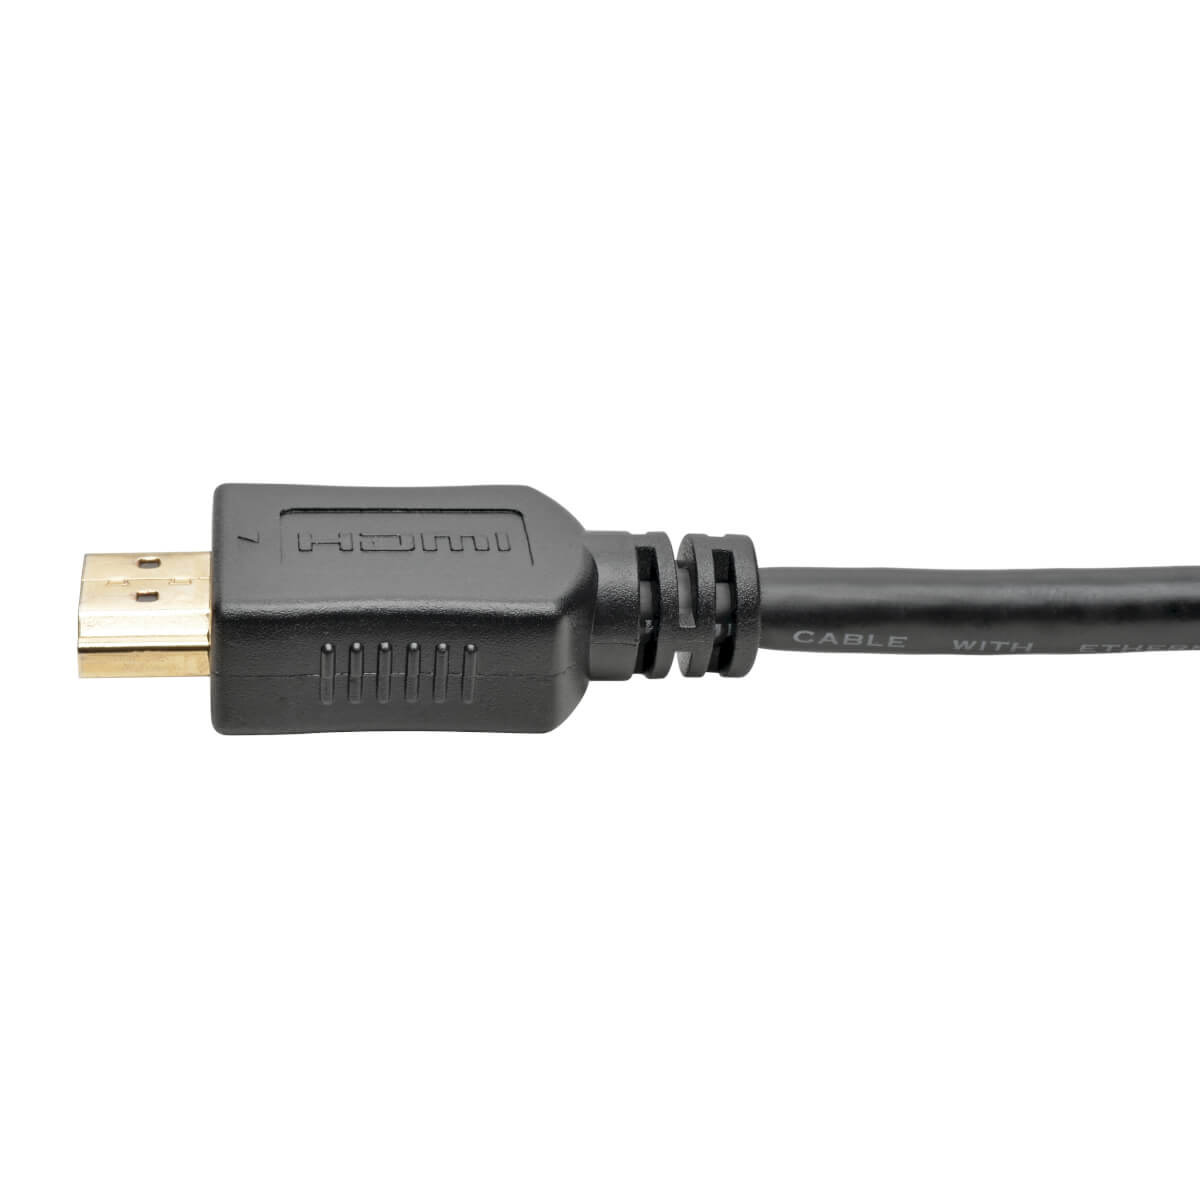 HDMI TO VGA ACTIVE ADAPTER CABLE 0.91 M